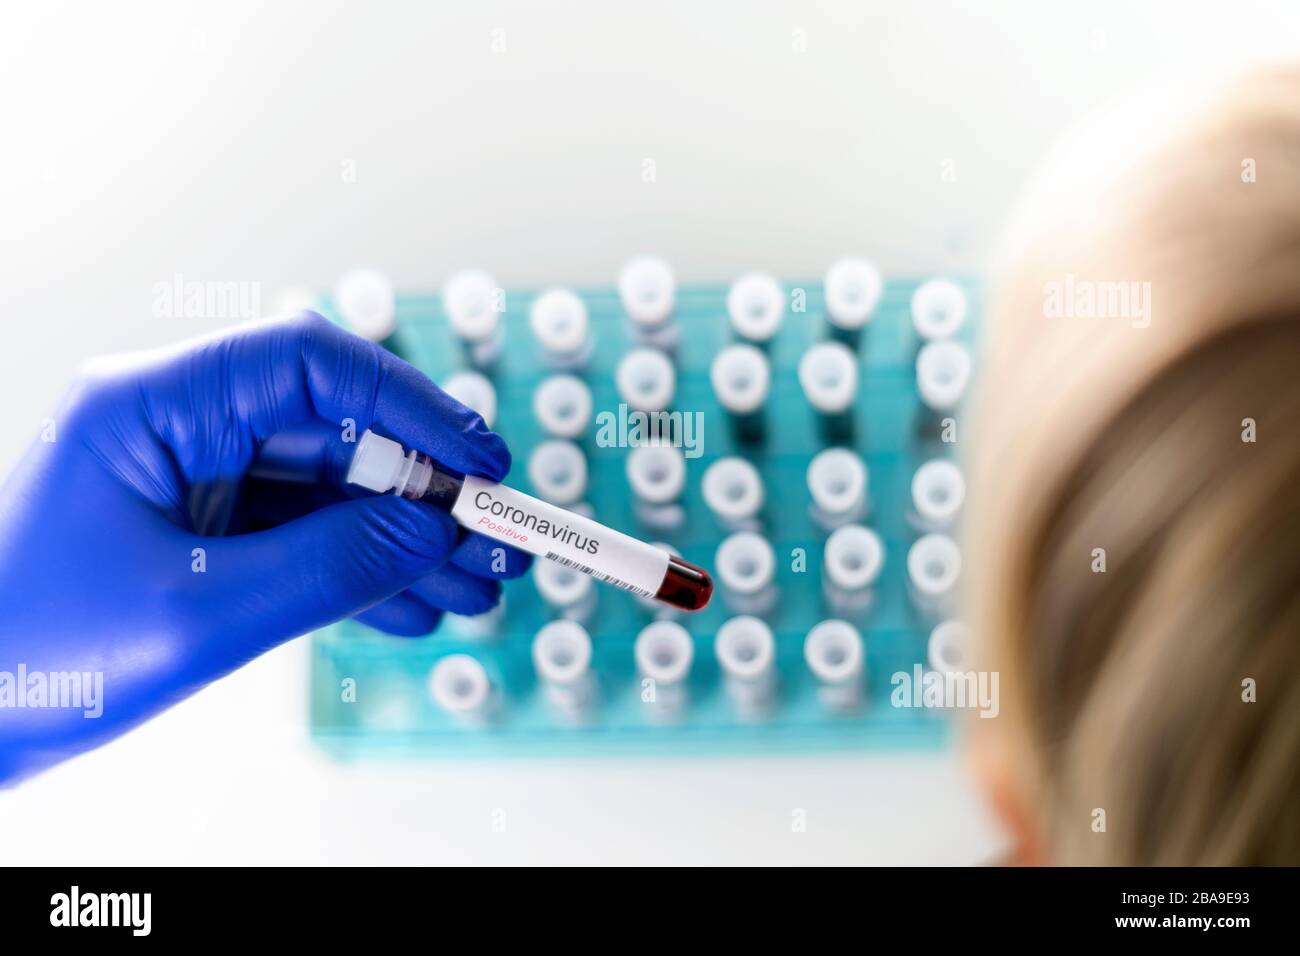 A young person looking at test-tube indicating positive results of coronavirus test hold by health worker. Stock Photo